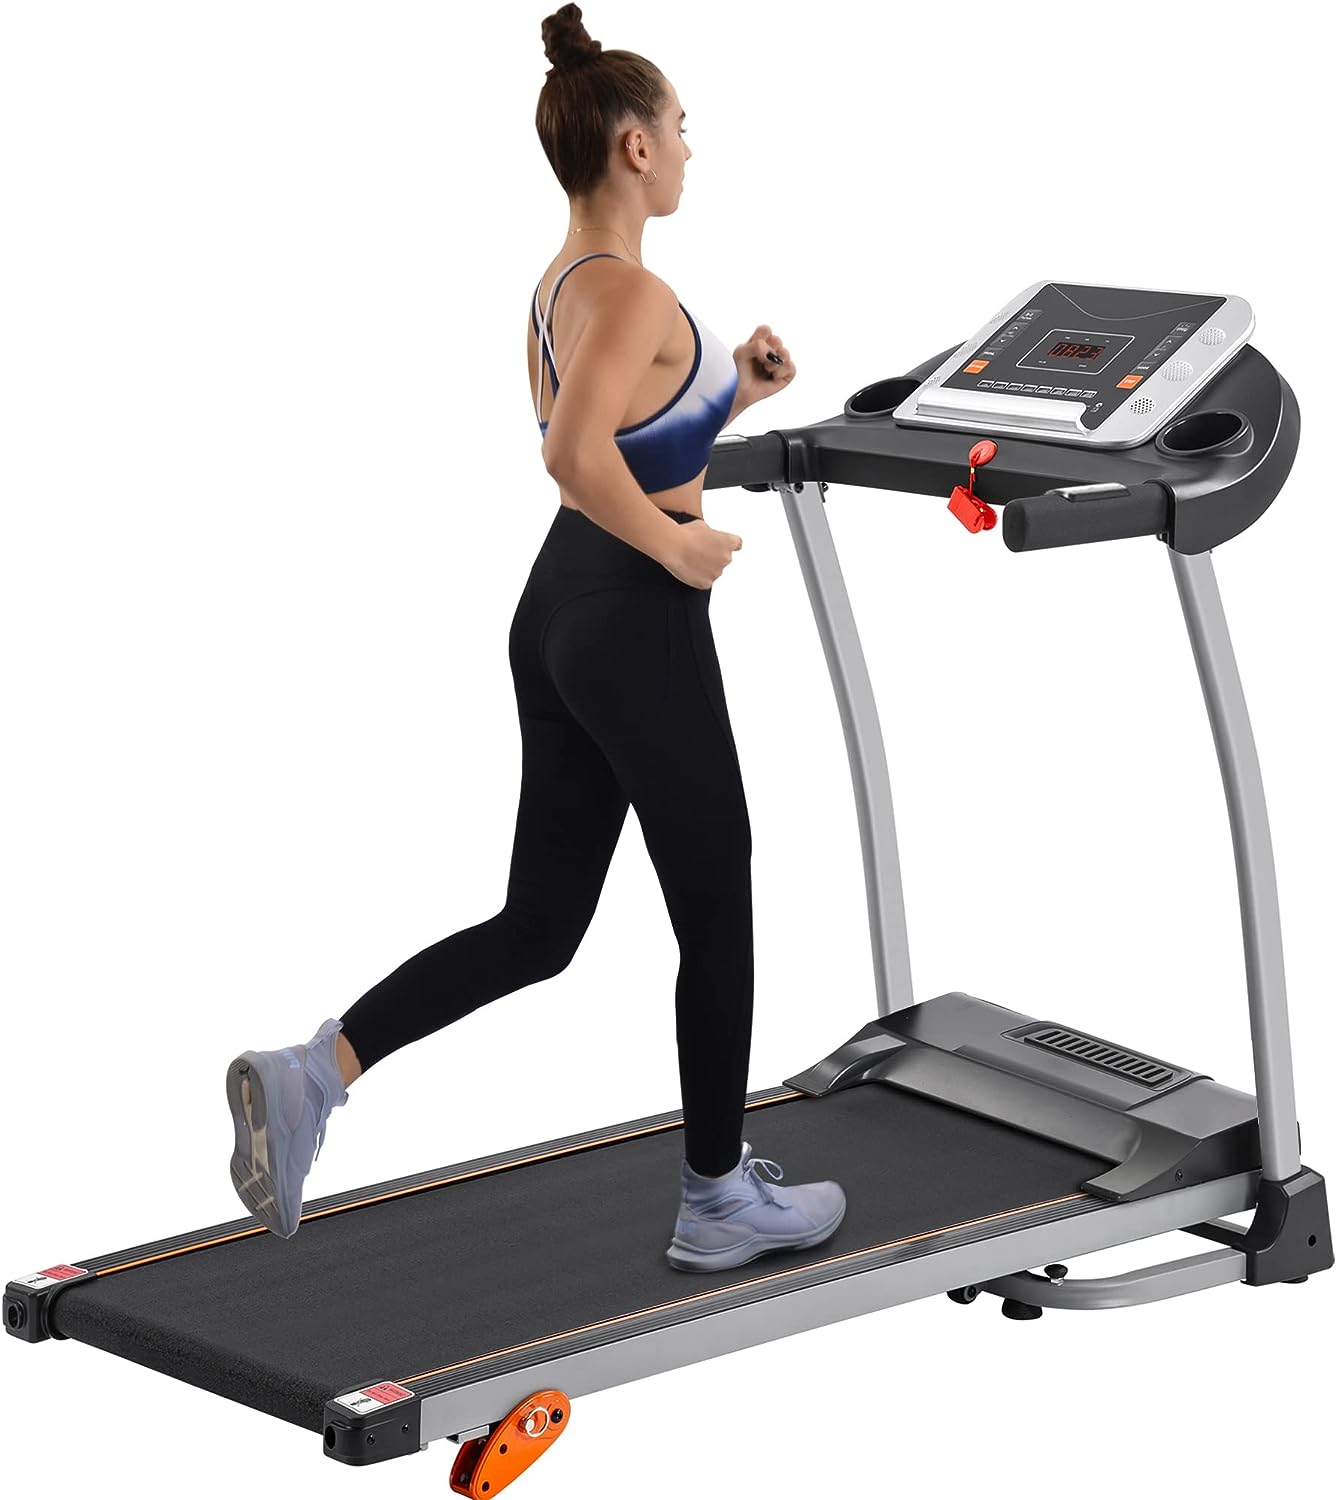 Merax Foldable Electric Treadmill 2.5HP Motorized Running Machine with 12 Perset Programs 300LBS Weight Capacity Walking Jogging Treadmill for Office Home Gym Workout with Incline